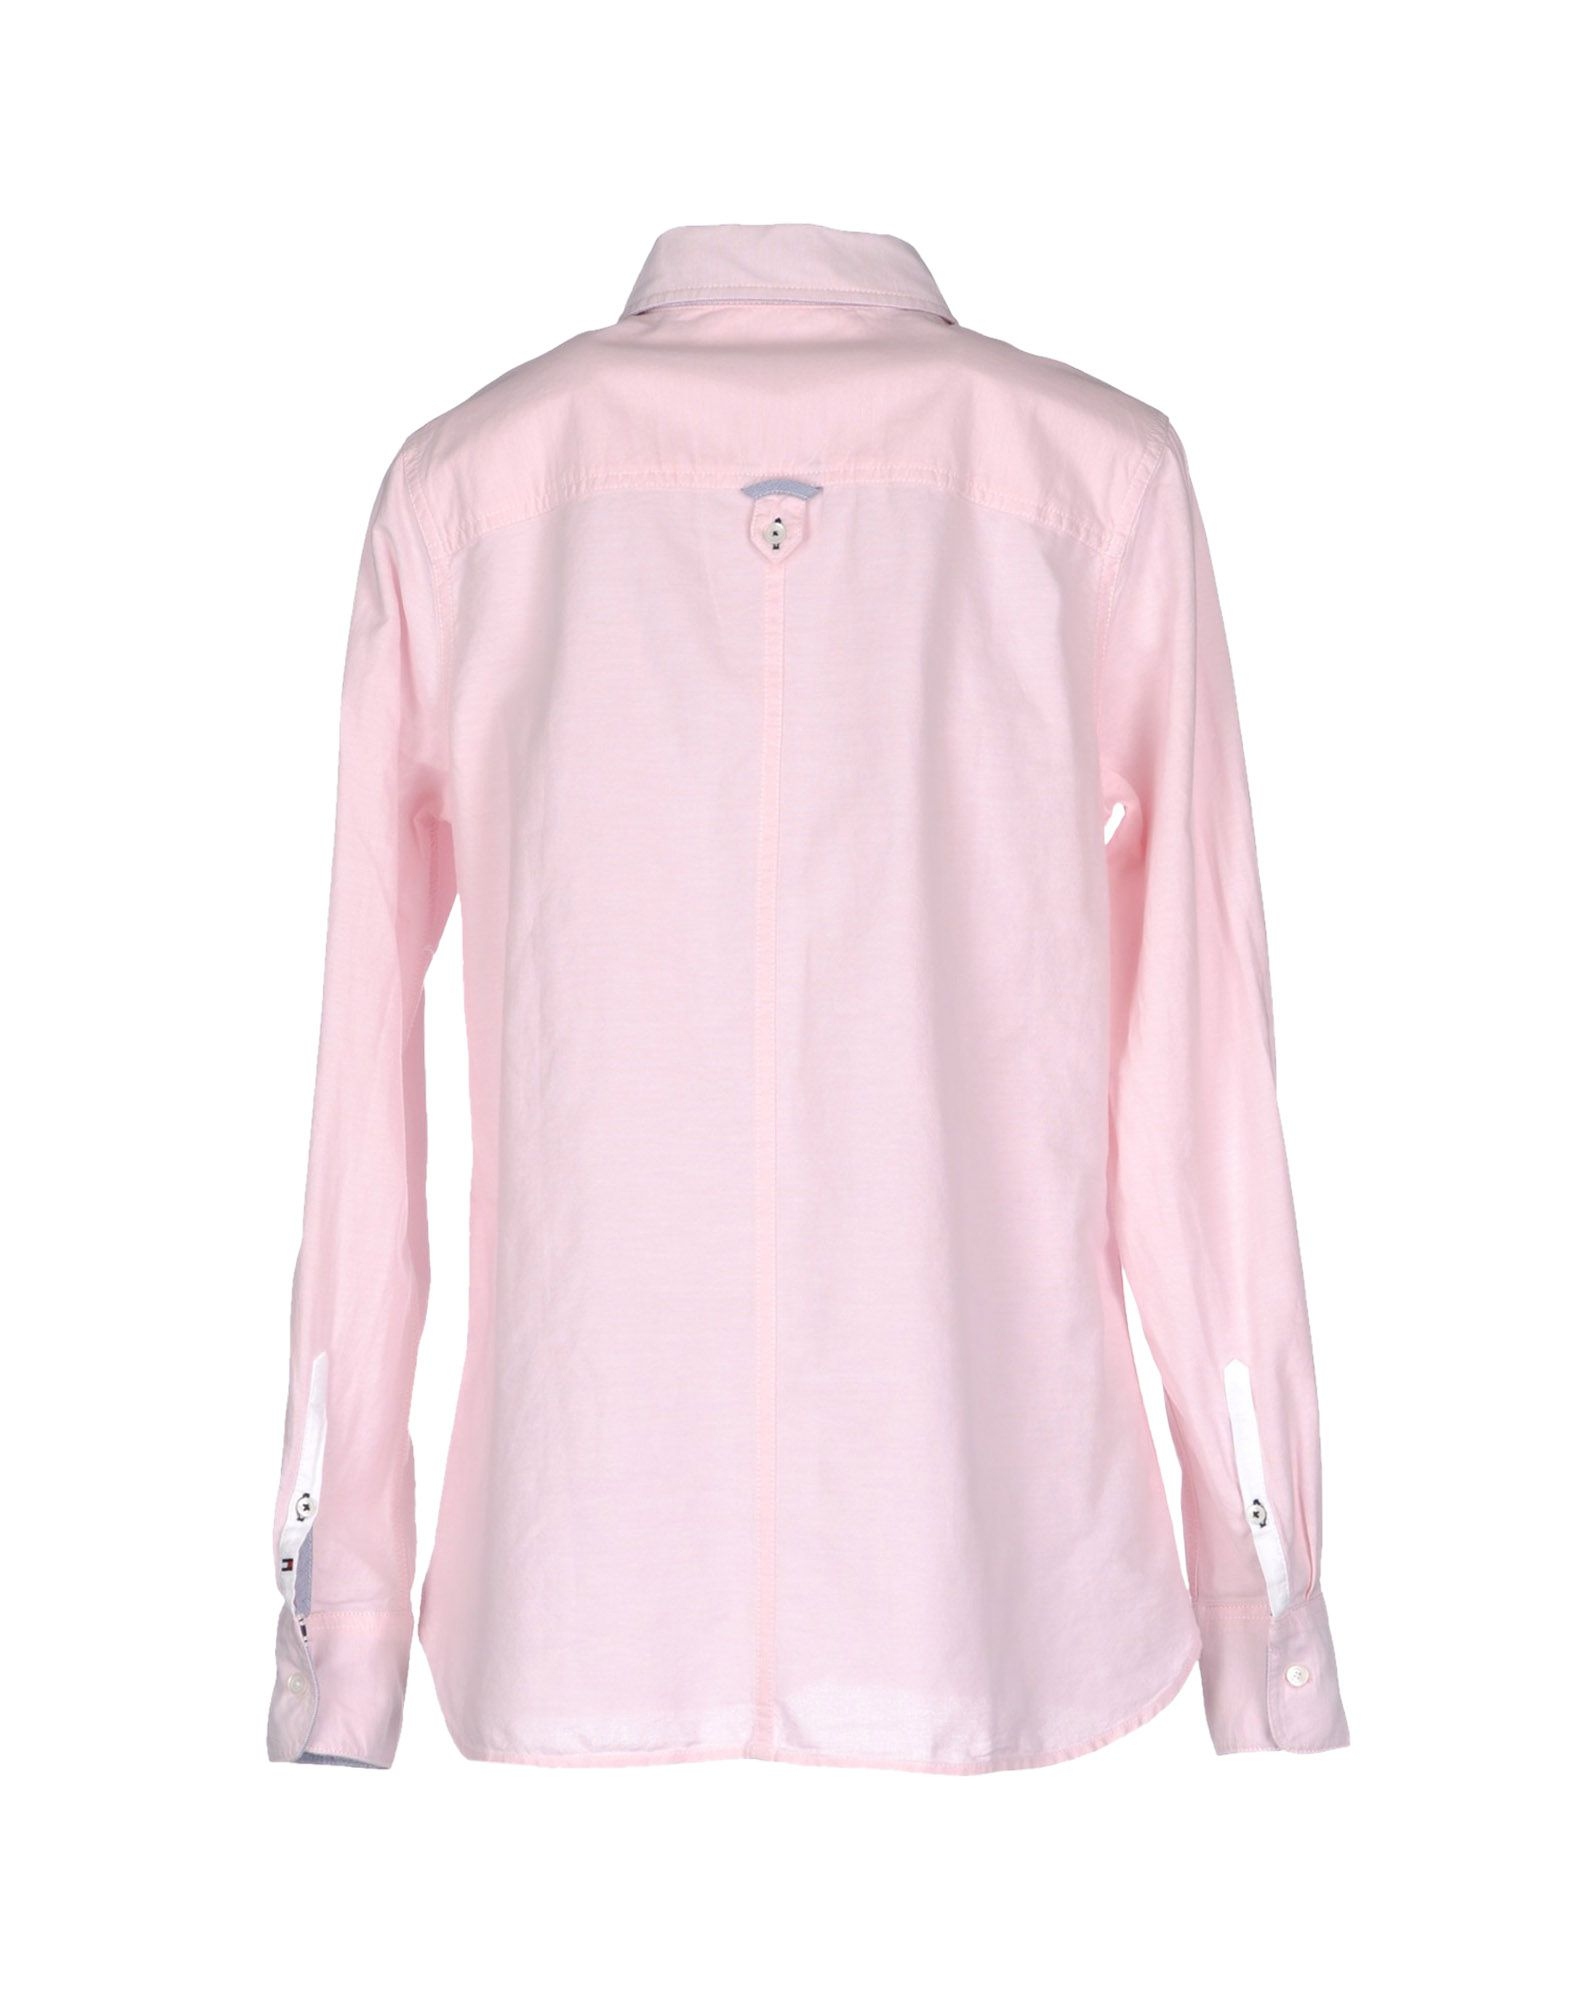 Tommy hilfiger Long Sleeve Shirt in Pink | Lyst